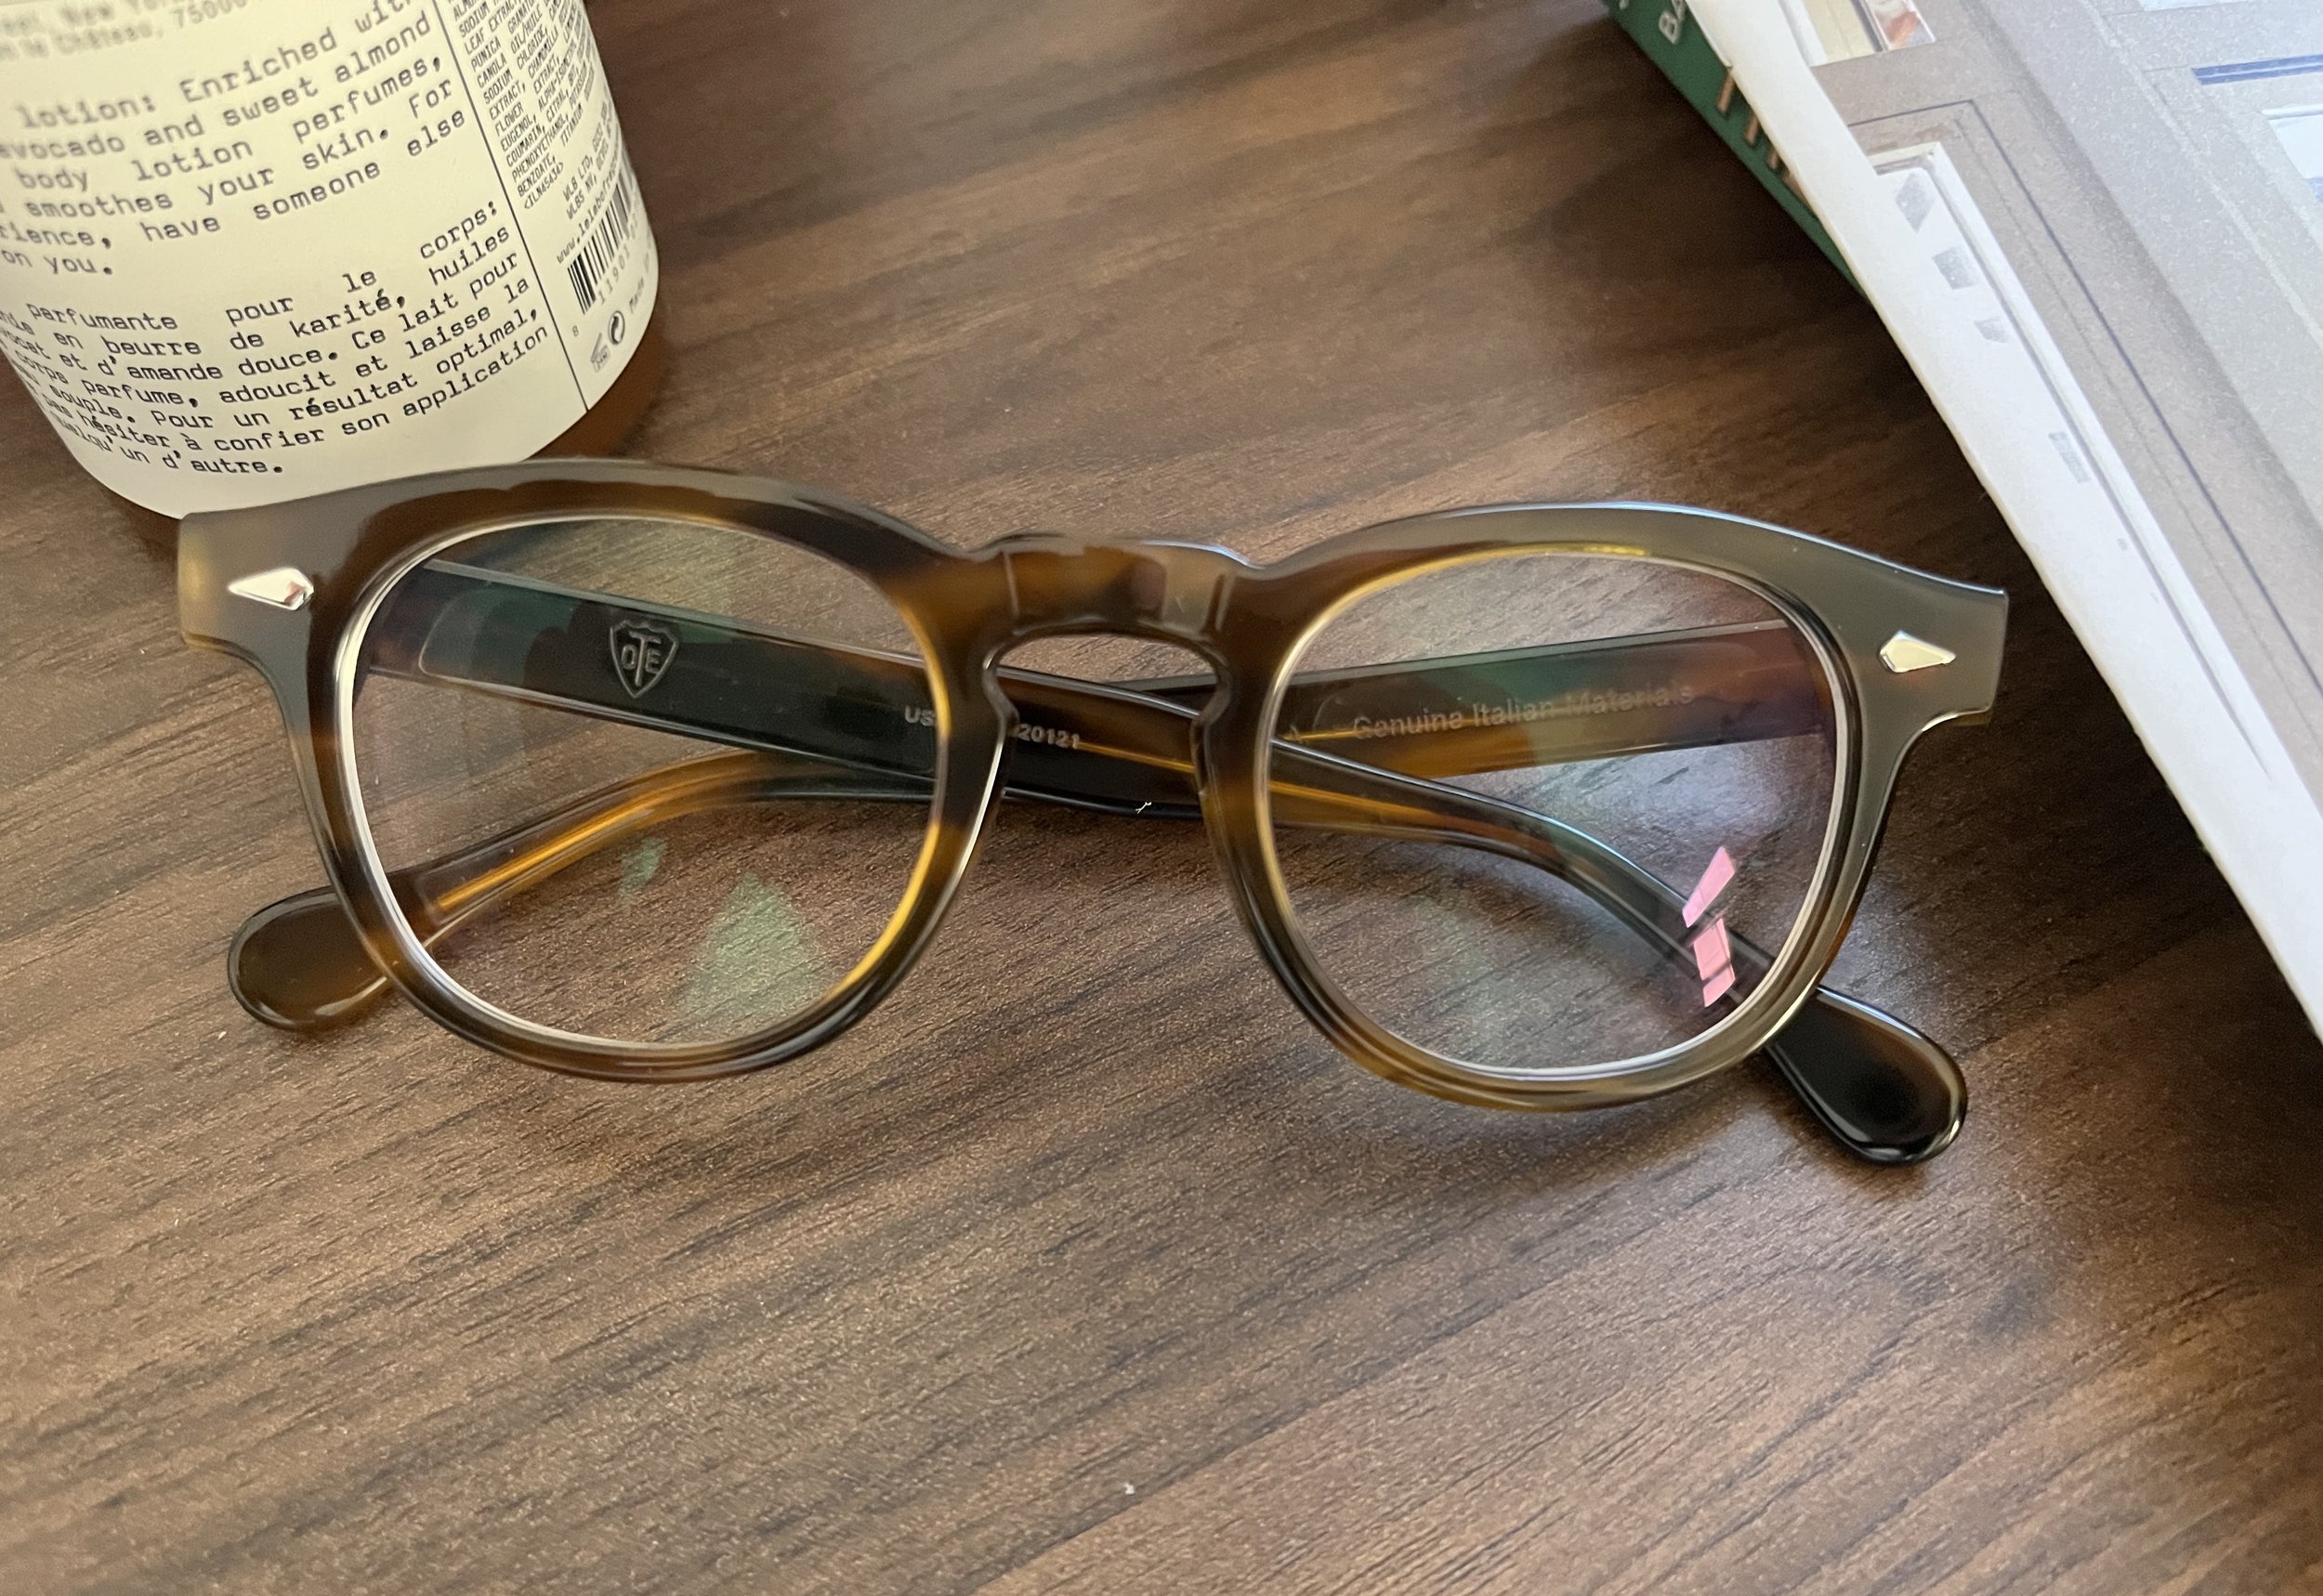 Review: Tart Optical (with Discount Code!) — The Peak Lapel